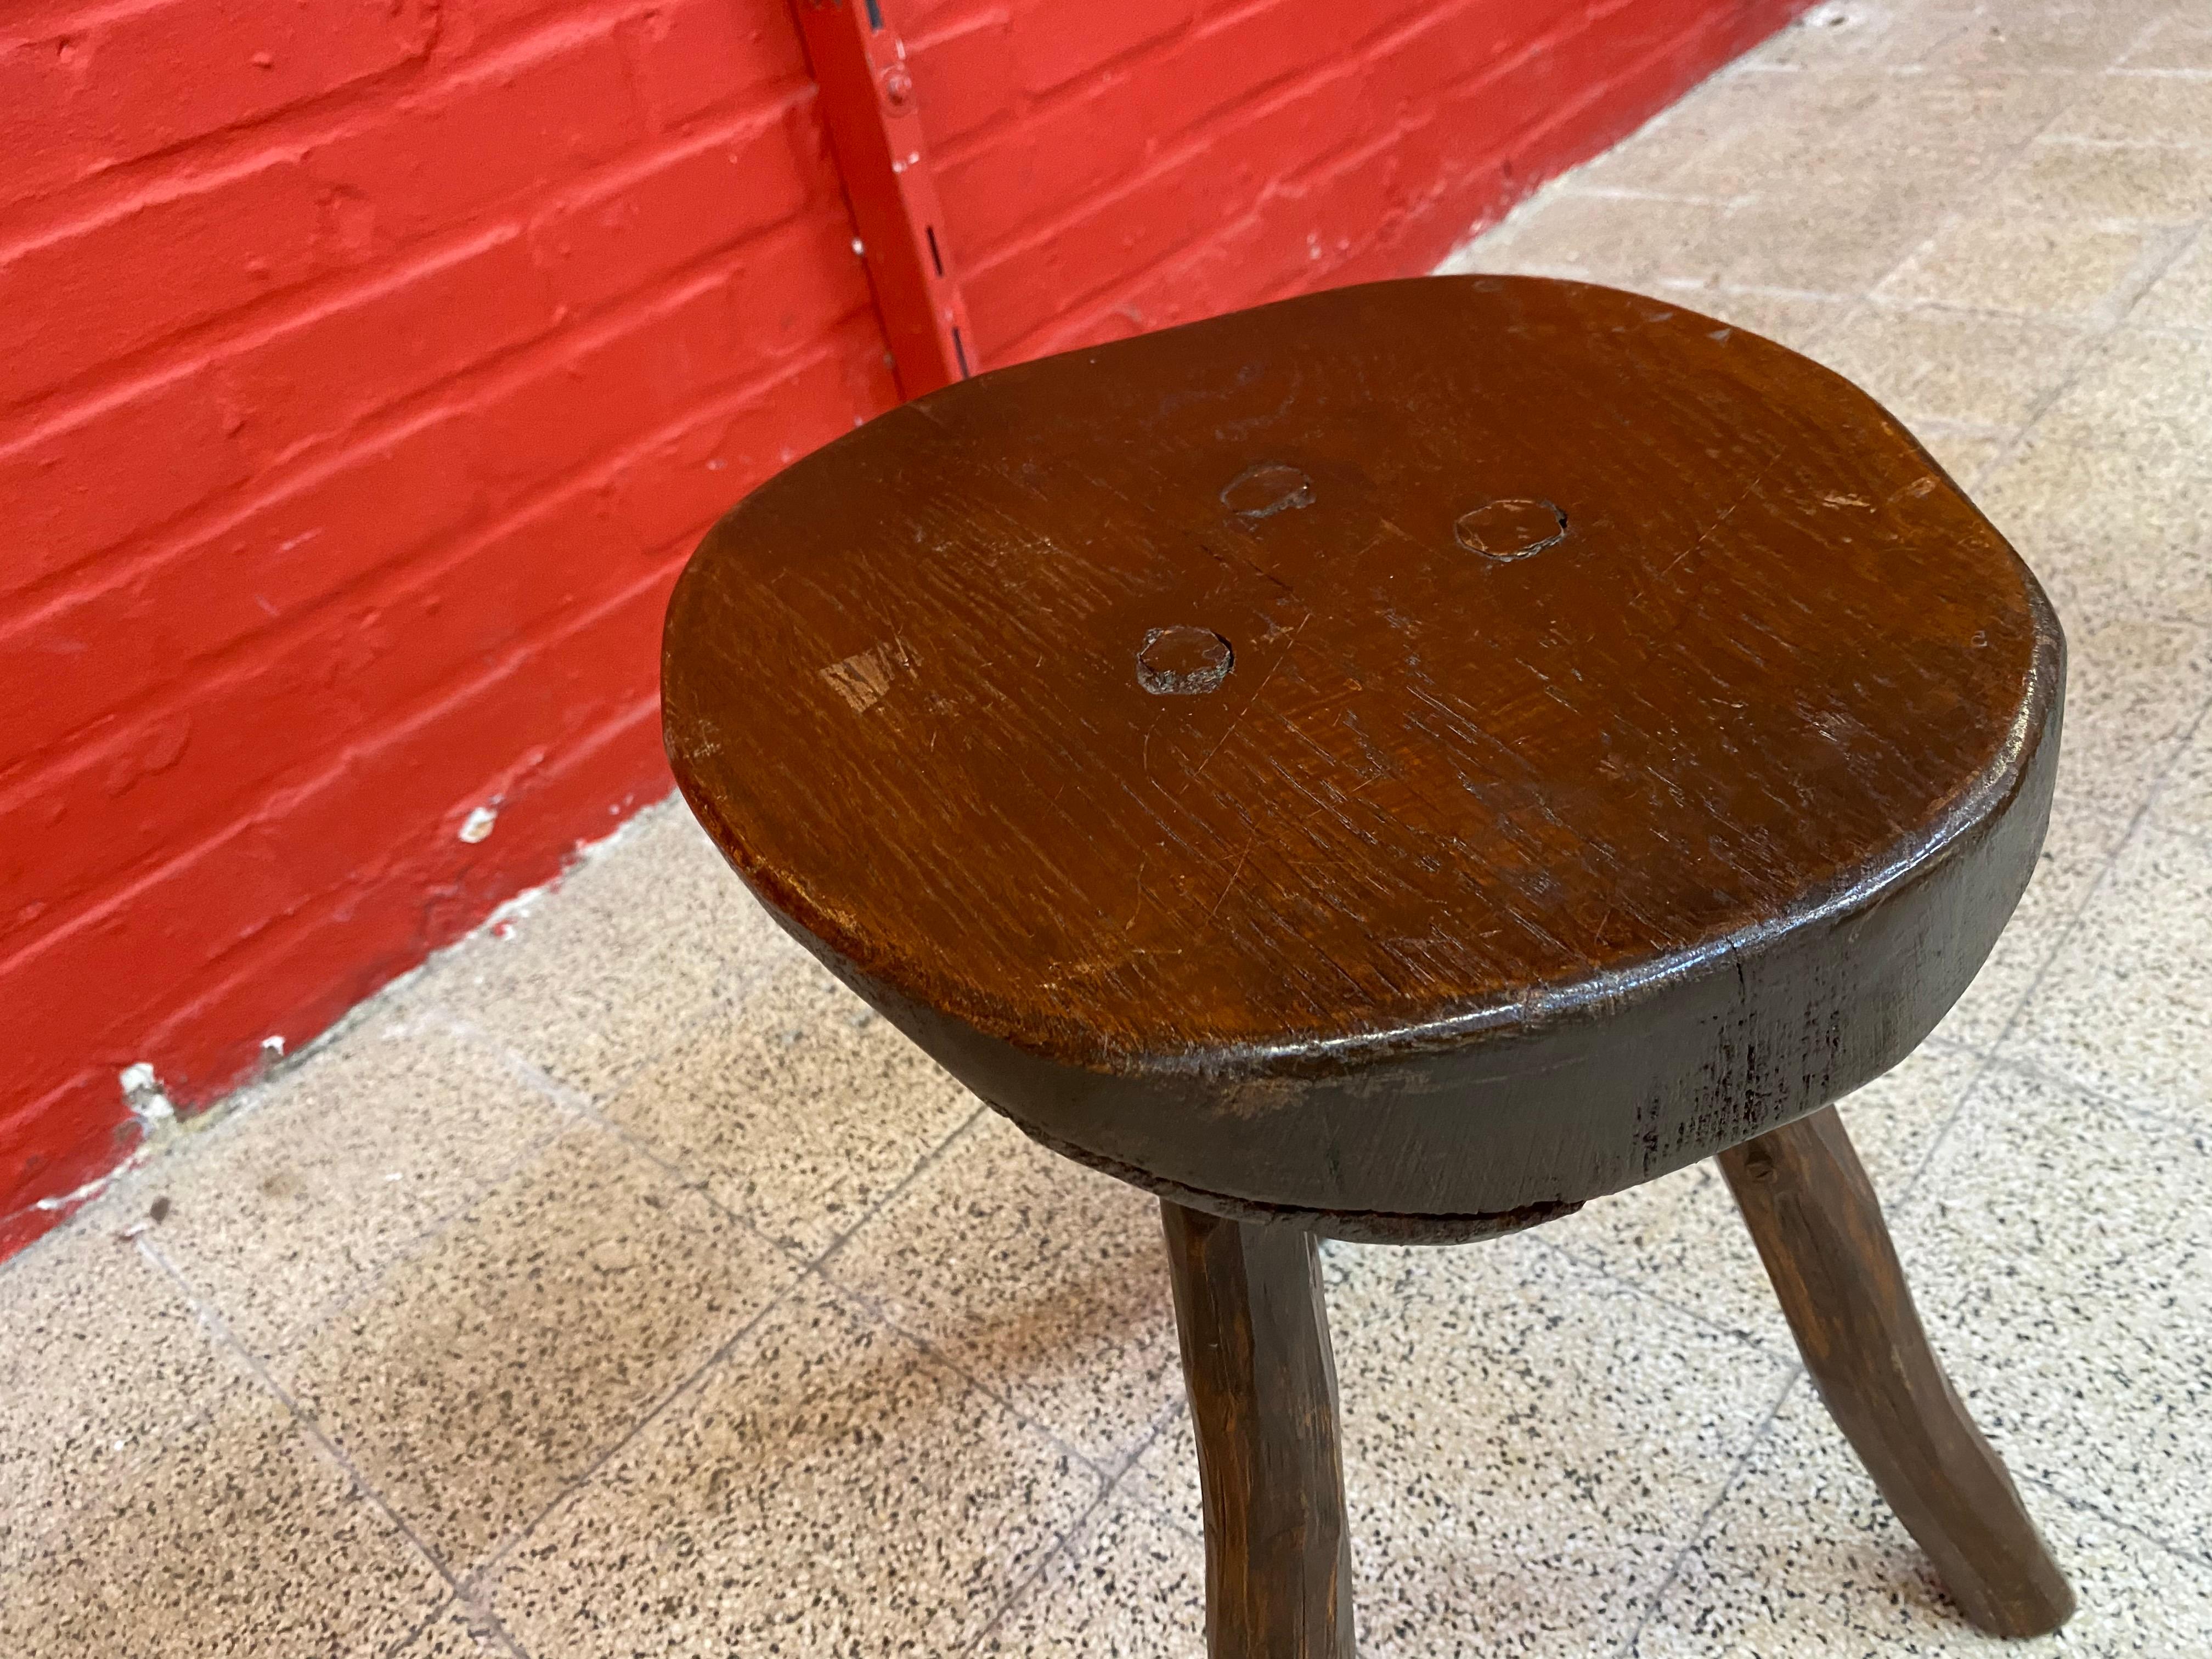 Two Brutalist oak stools, circa 1950.
price is by item
two are available